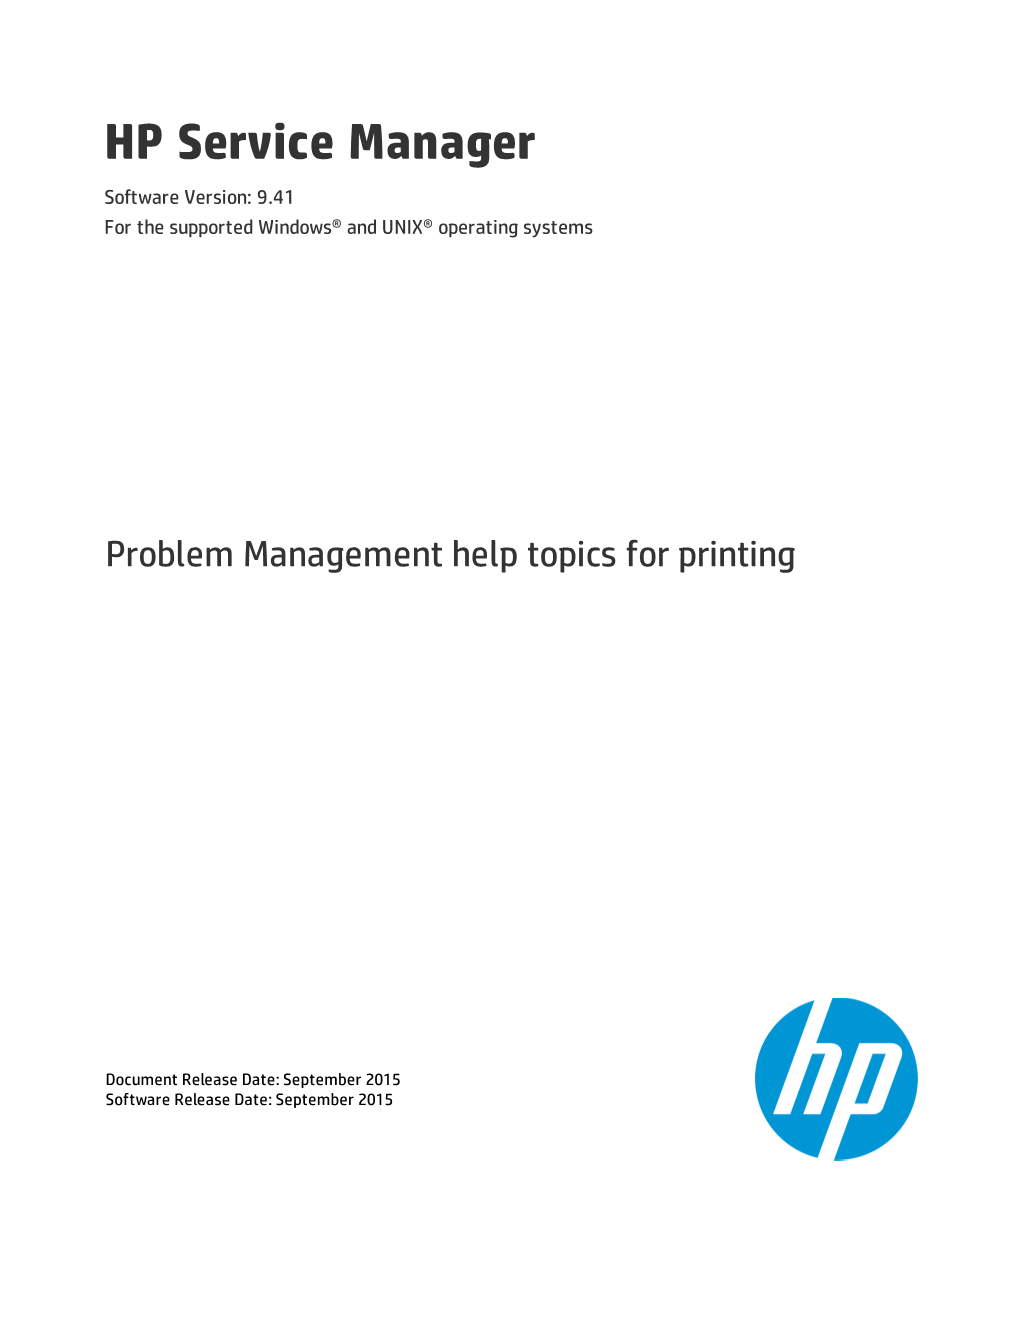 Problem Management Help Topics for Printing